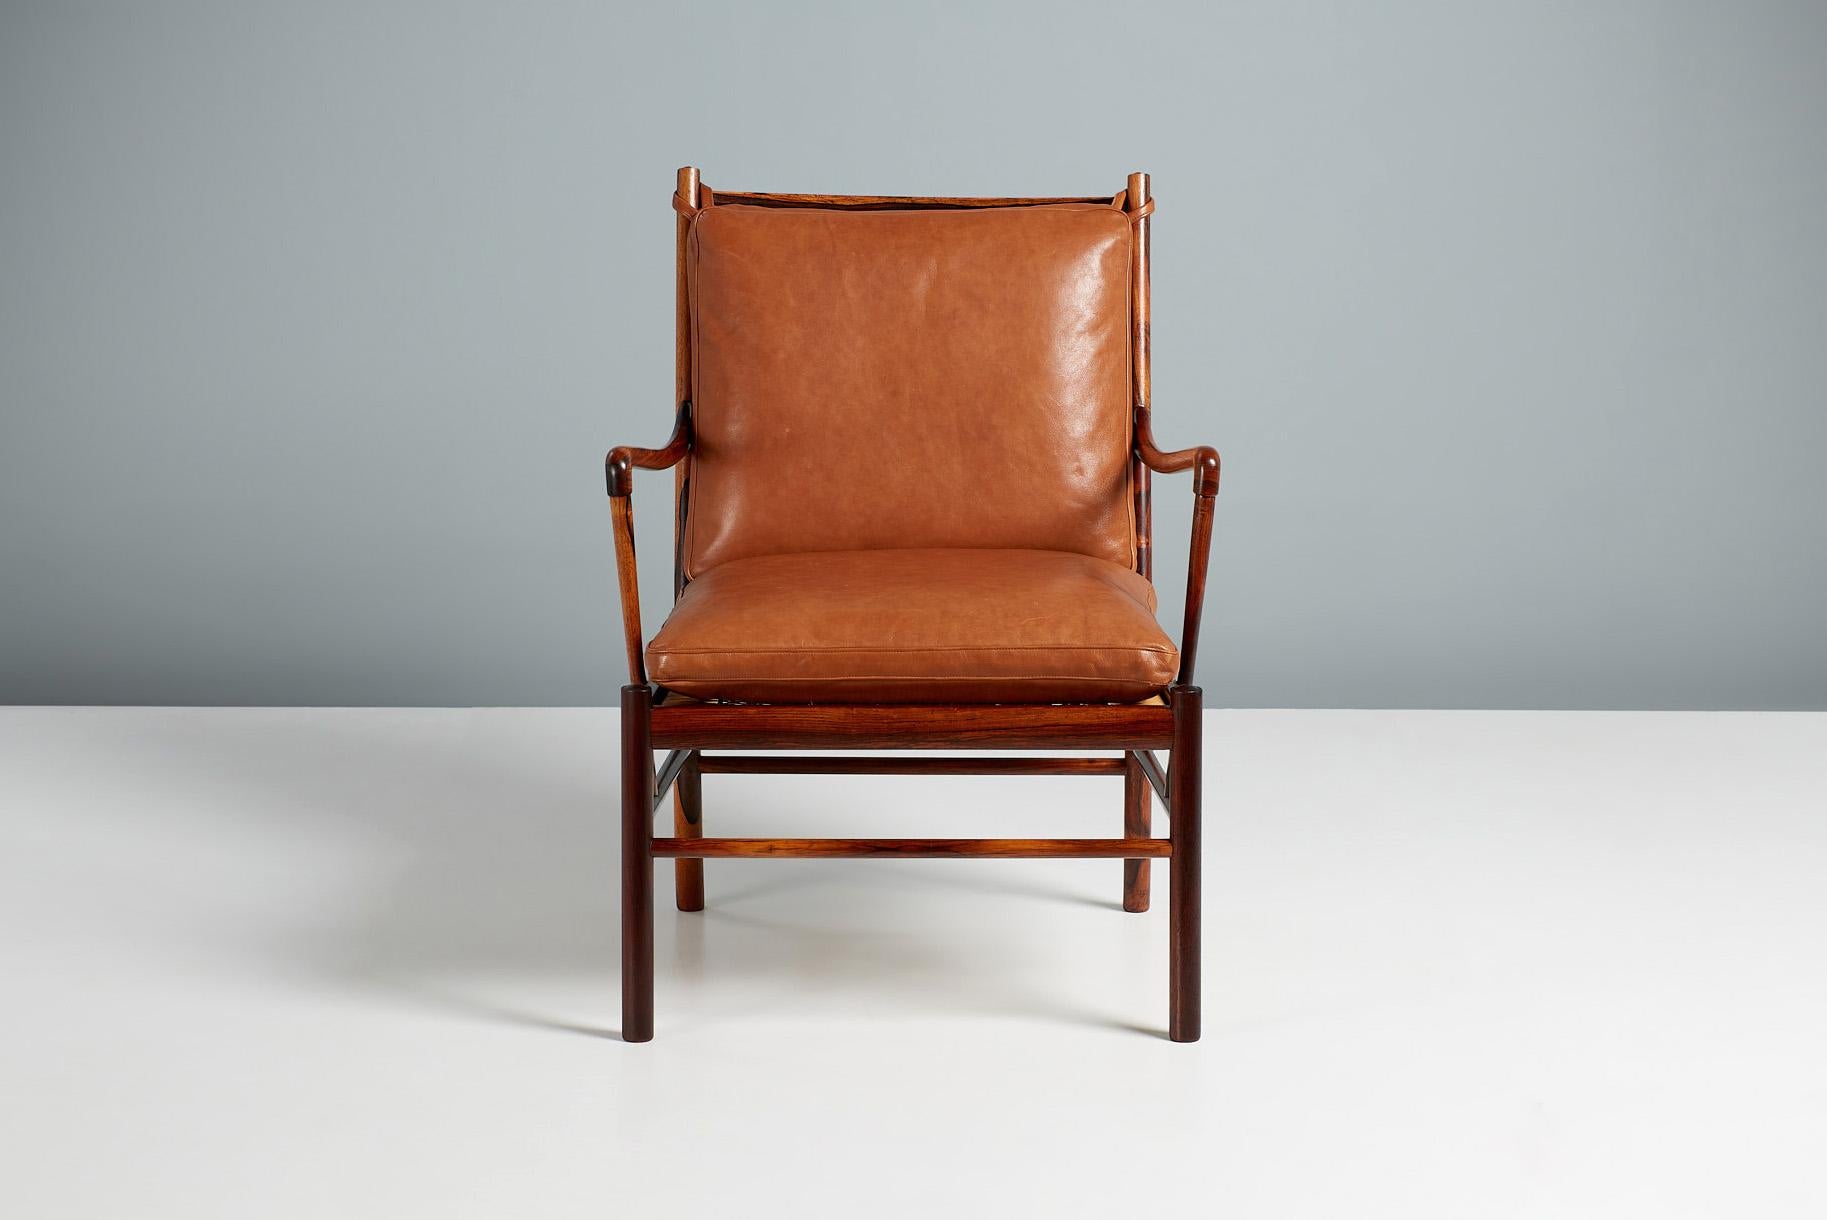 Ole Wanscher - Model PJ-149 Colonial Chair, 1949

Ole Wanscher's iconic career high-point: the Colonial Chair was designed in 1949 and produced by master cabinetmaker Poul Jeppesen in Denmark throughout the 1950s. It references colonial-era